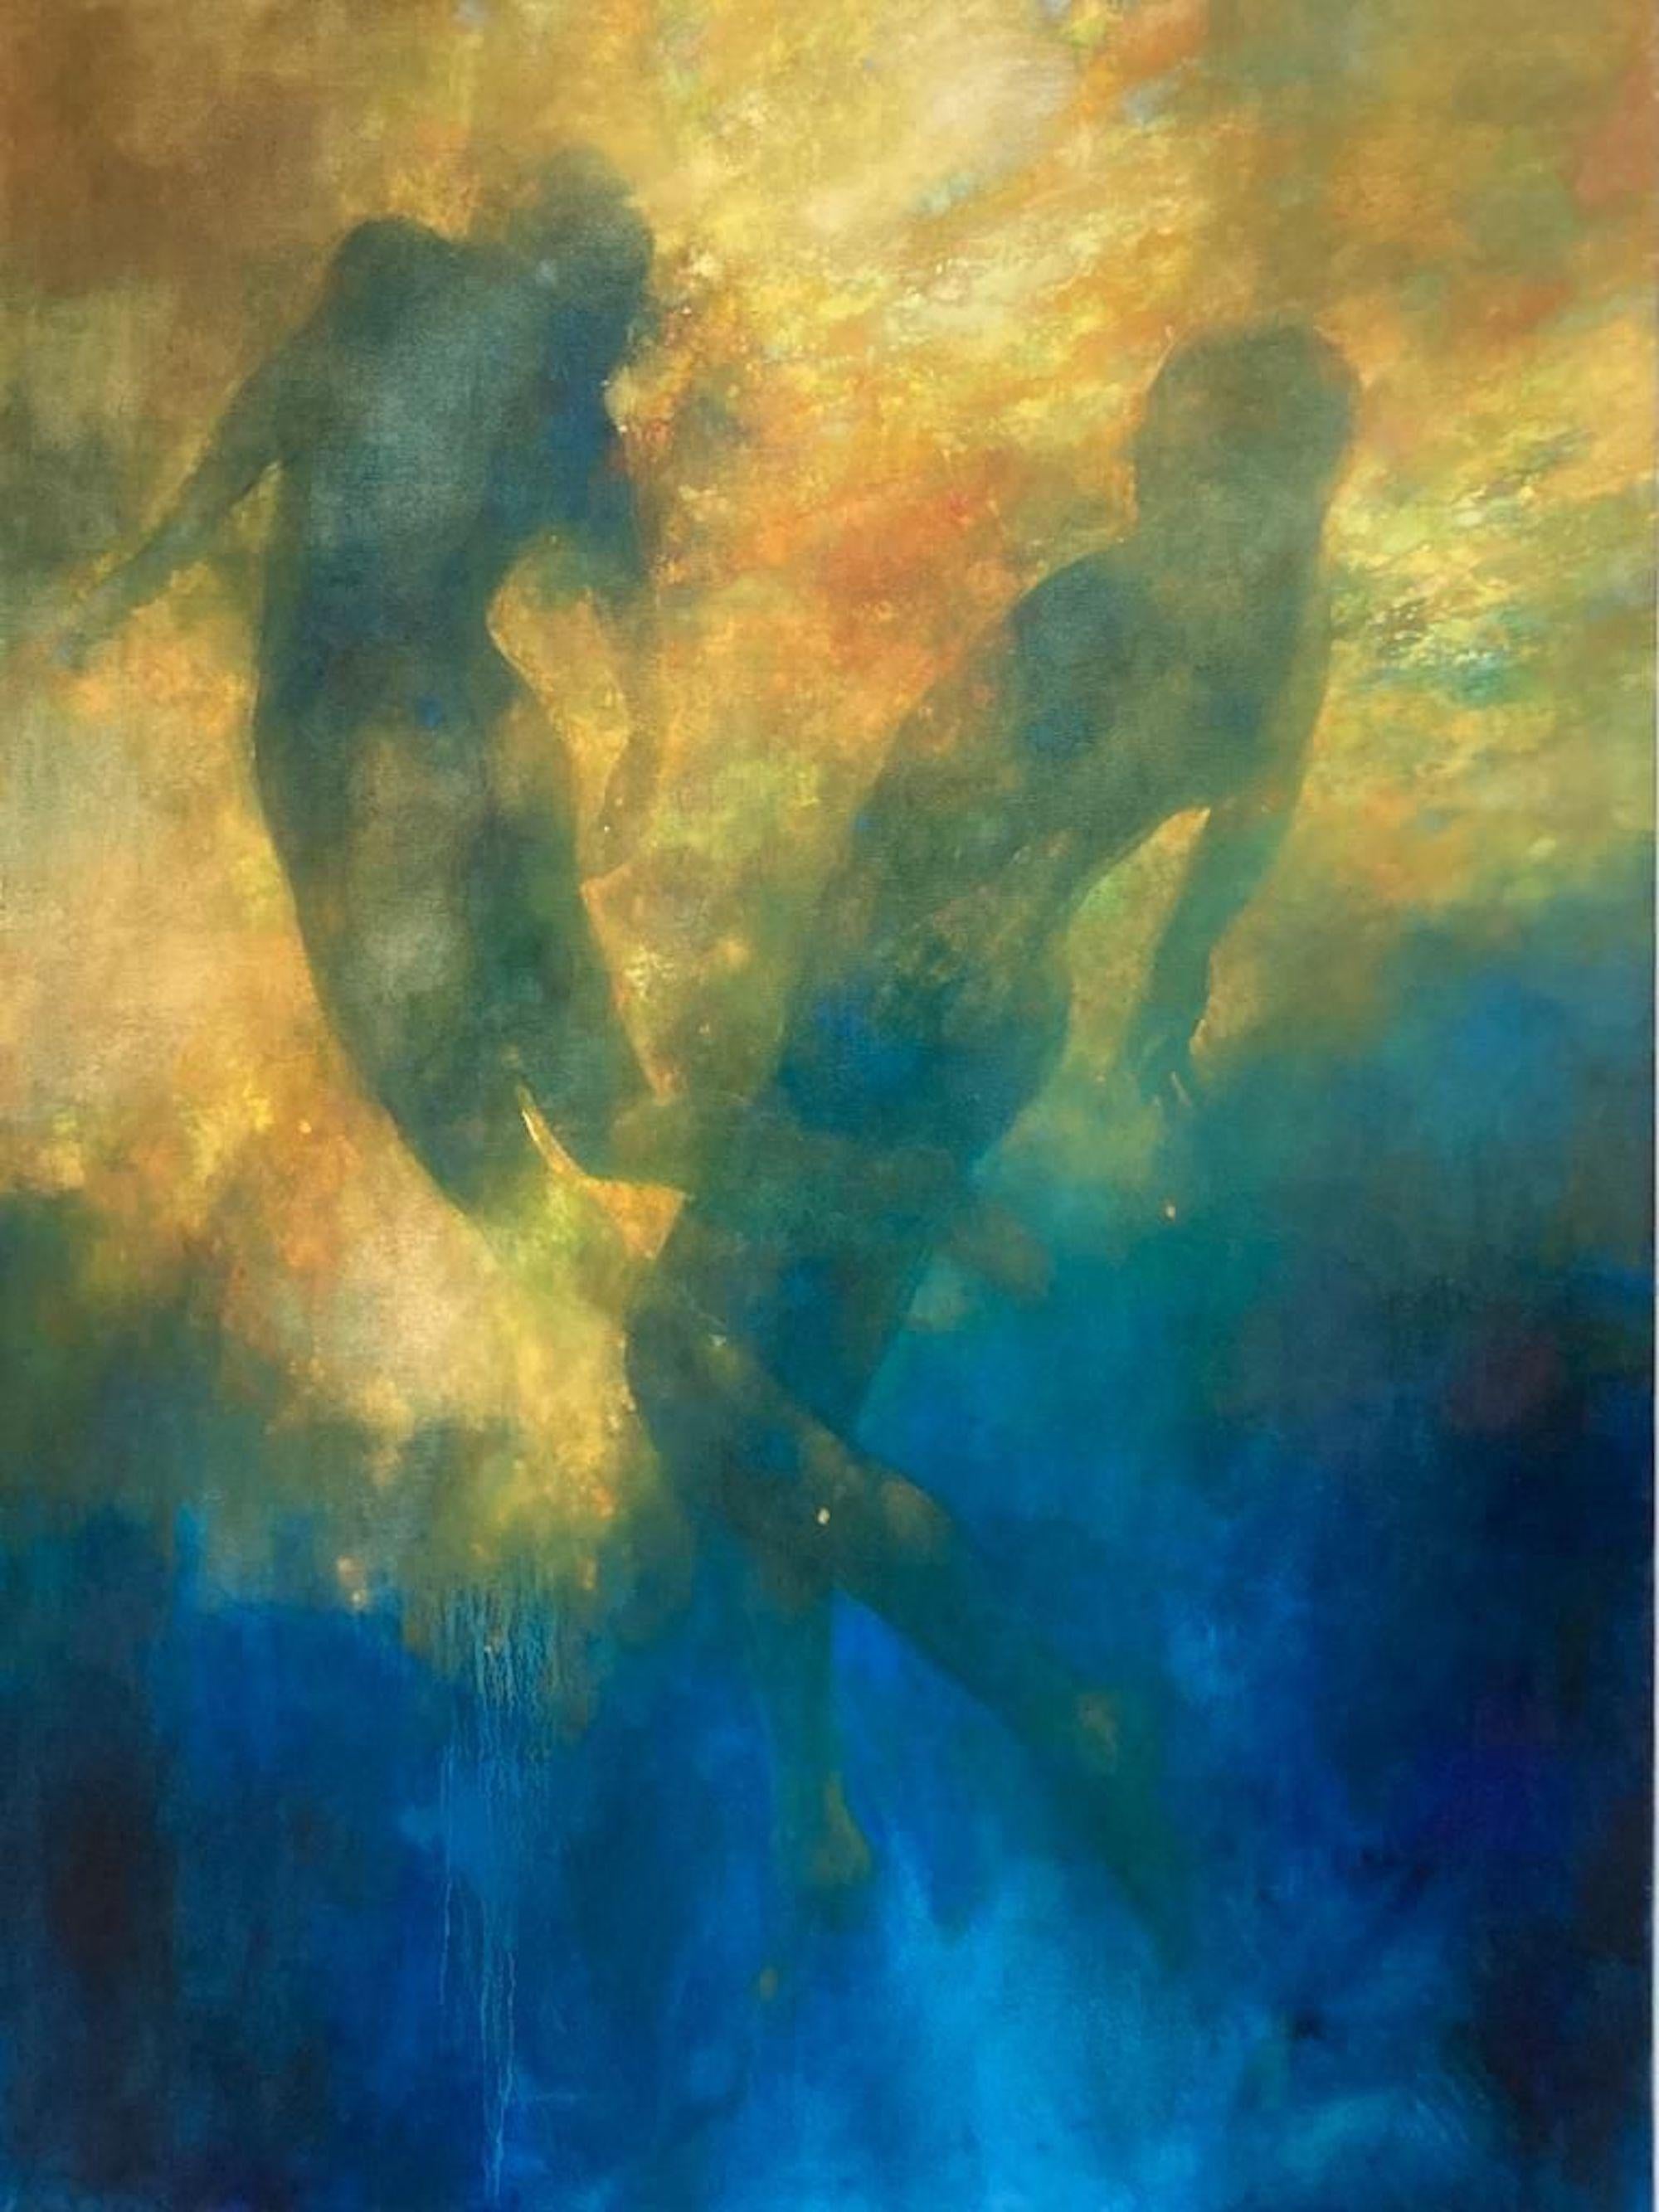 Light Haze is an original oil painting by Bill Bate, influenced by Gustav Klimt's painting 'Medicine'. Bill Bates was interested in the power and creative force of the sun and has tried to capture some of that energy often recalling Professor Brian